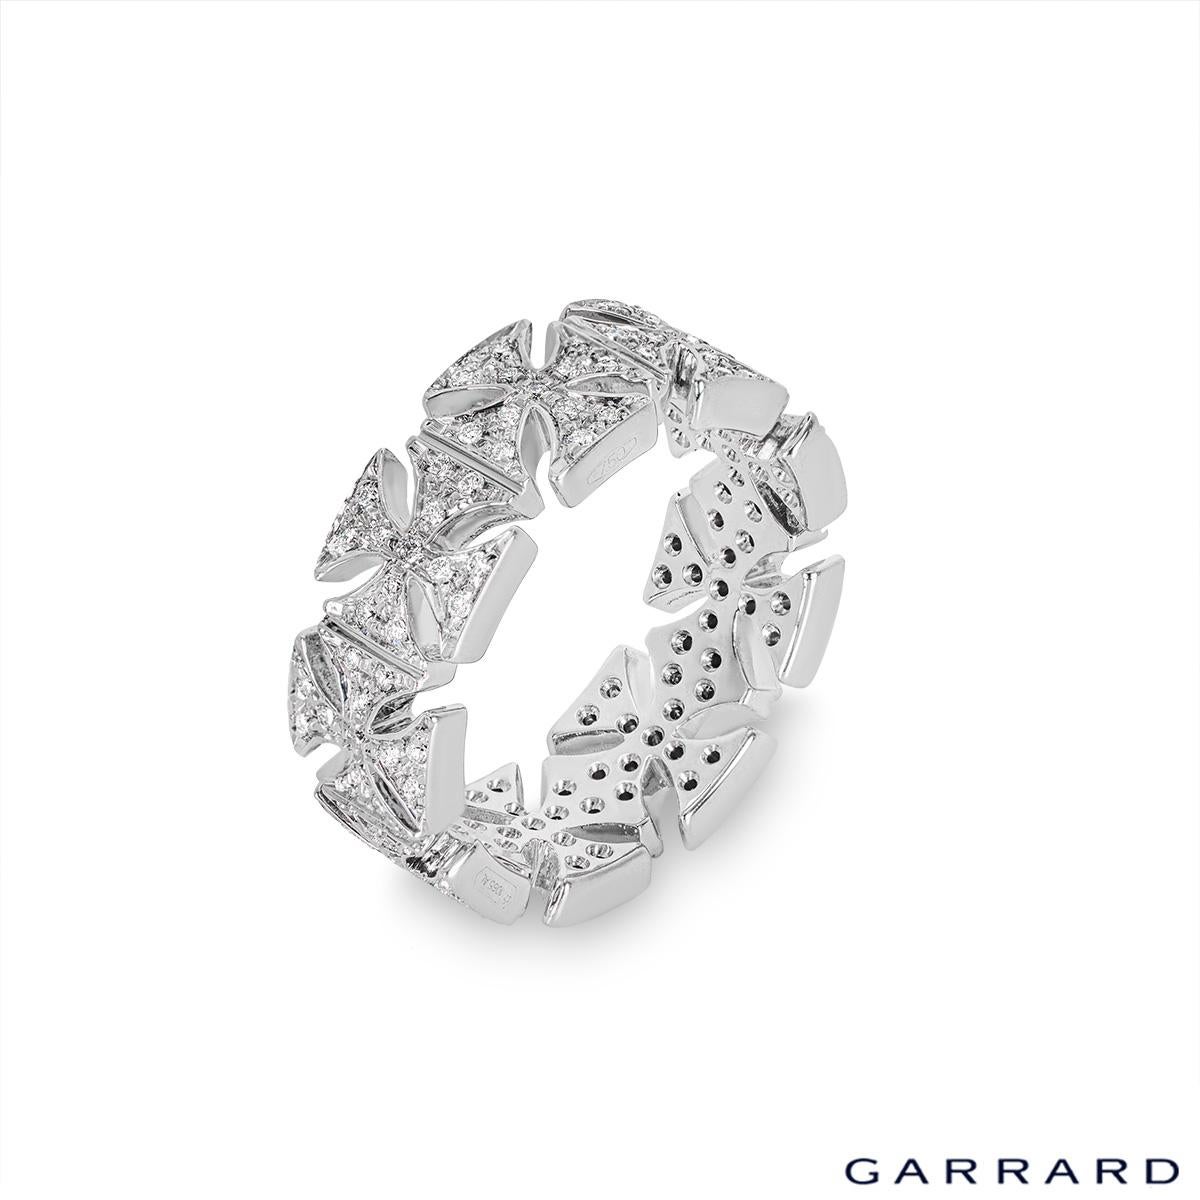 A unique 18k white gold diamond full eternity ring by Garrard. The ring features 9 diamond set cross motifs set throughout to form a full eternity band. The 117 round brilliant cut diamonds have an approximate total weight of 0.46ct, F-G colour and